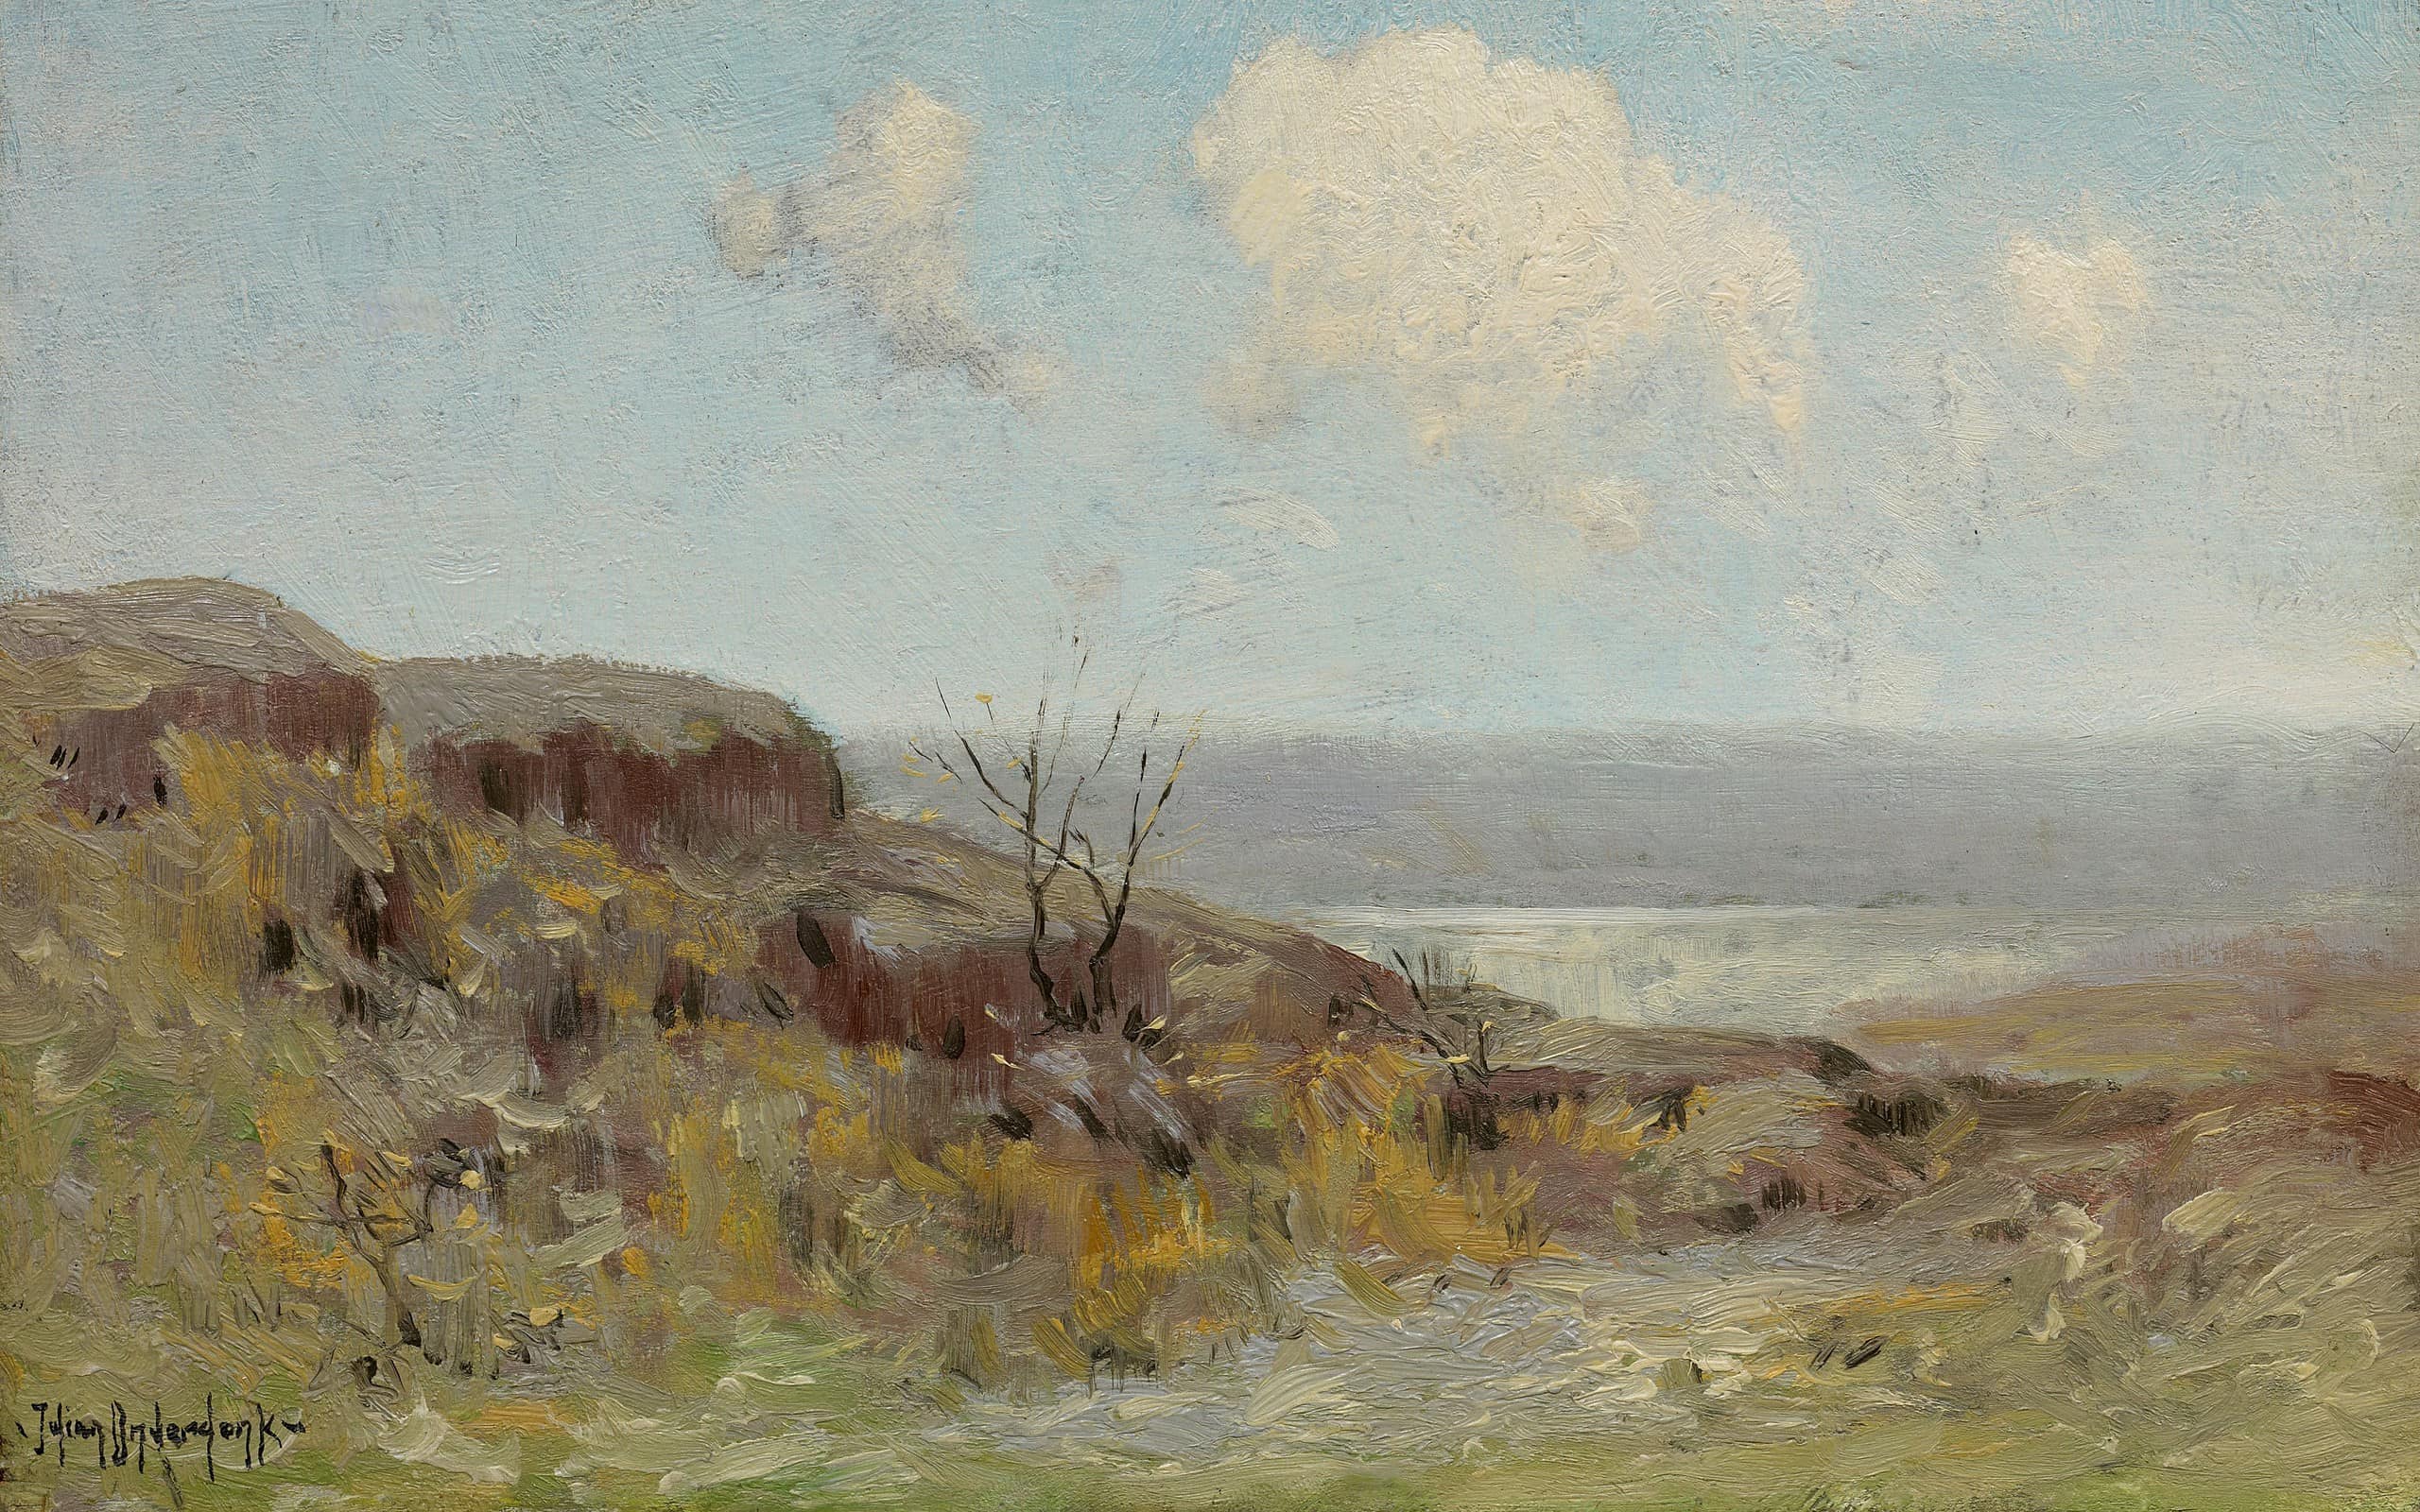 A painting of a Rocky hillside.